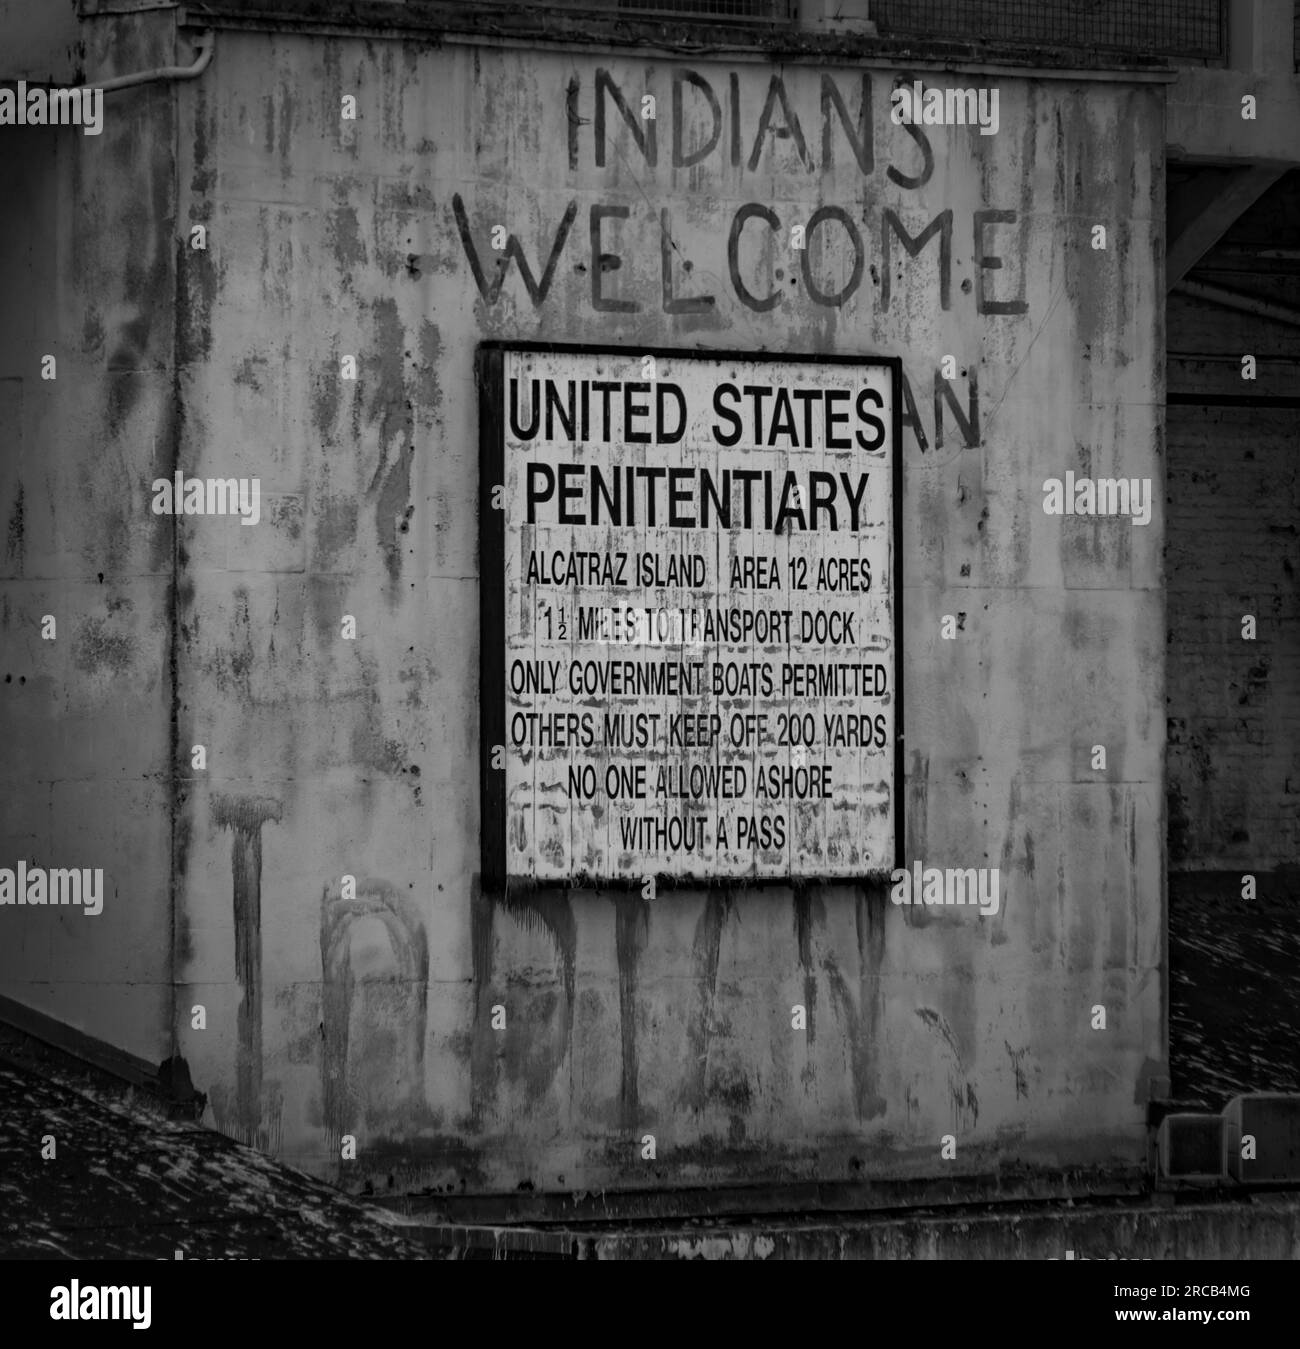 Plaque sing with indians welcome and penitentiary writings Alcatraz, San Francisco, California Stock Photo